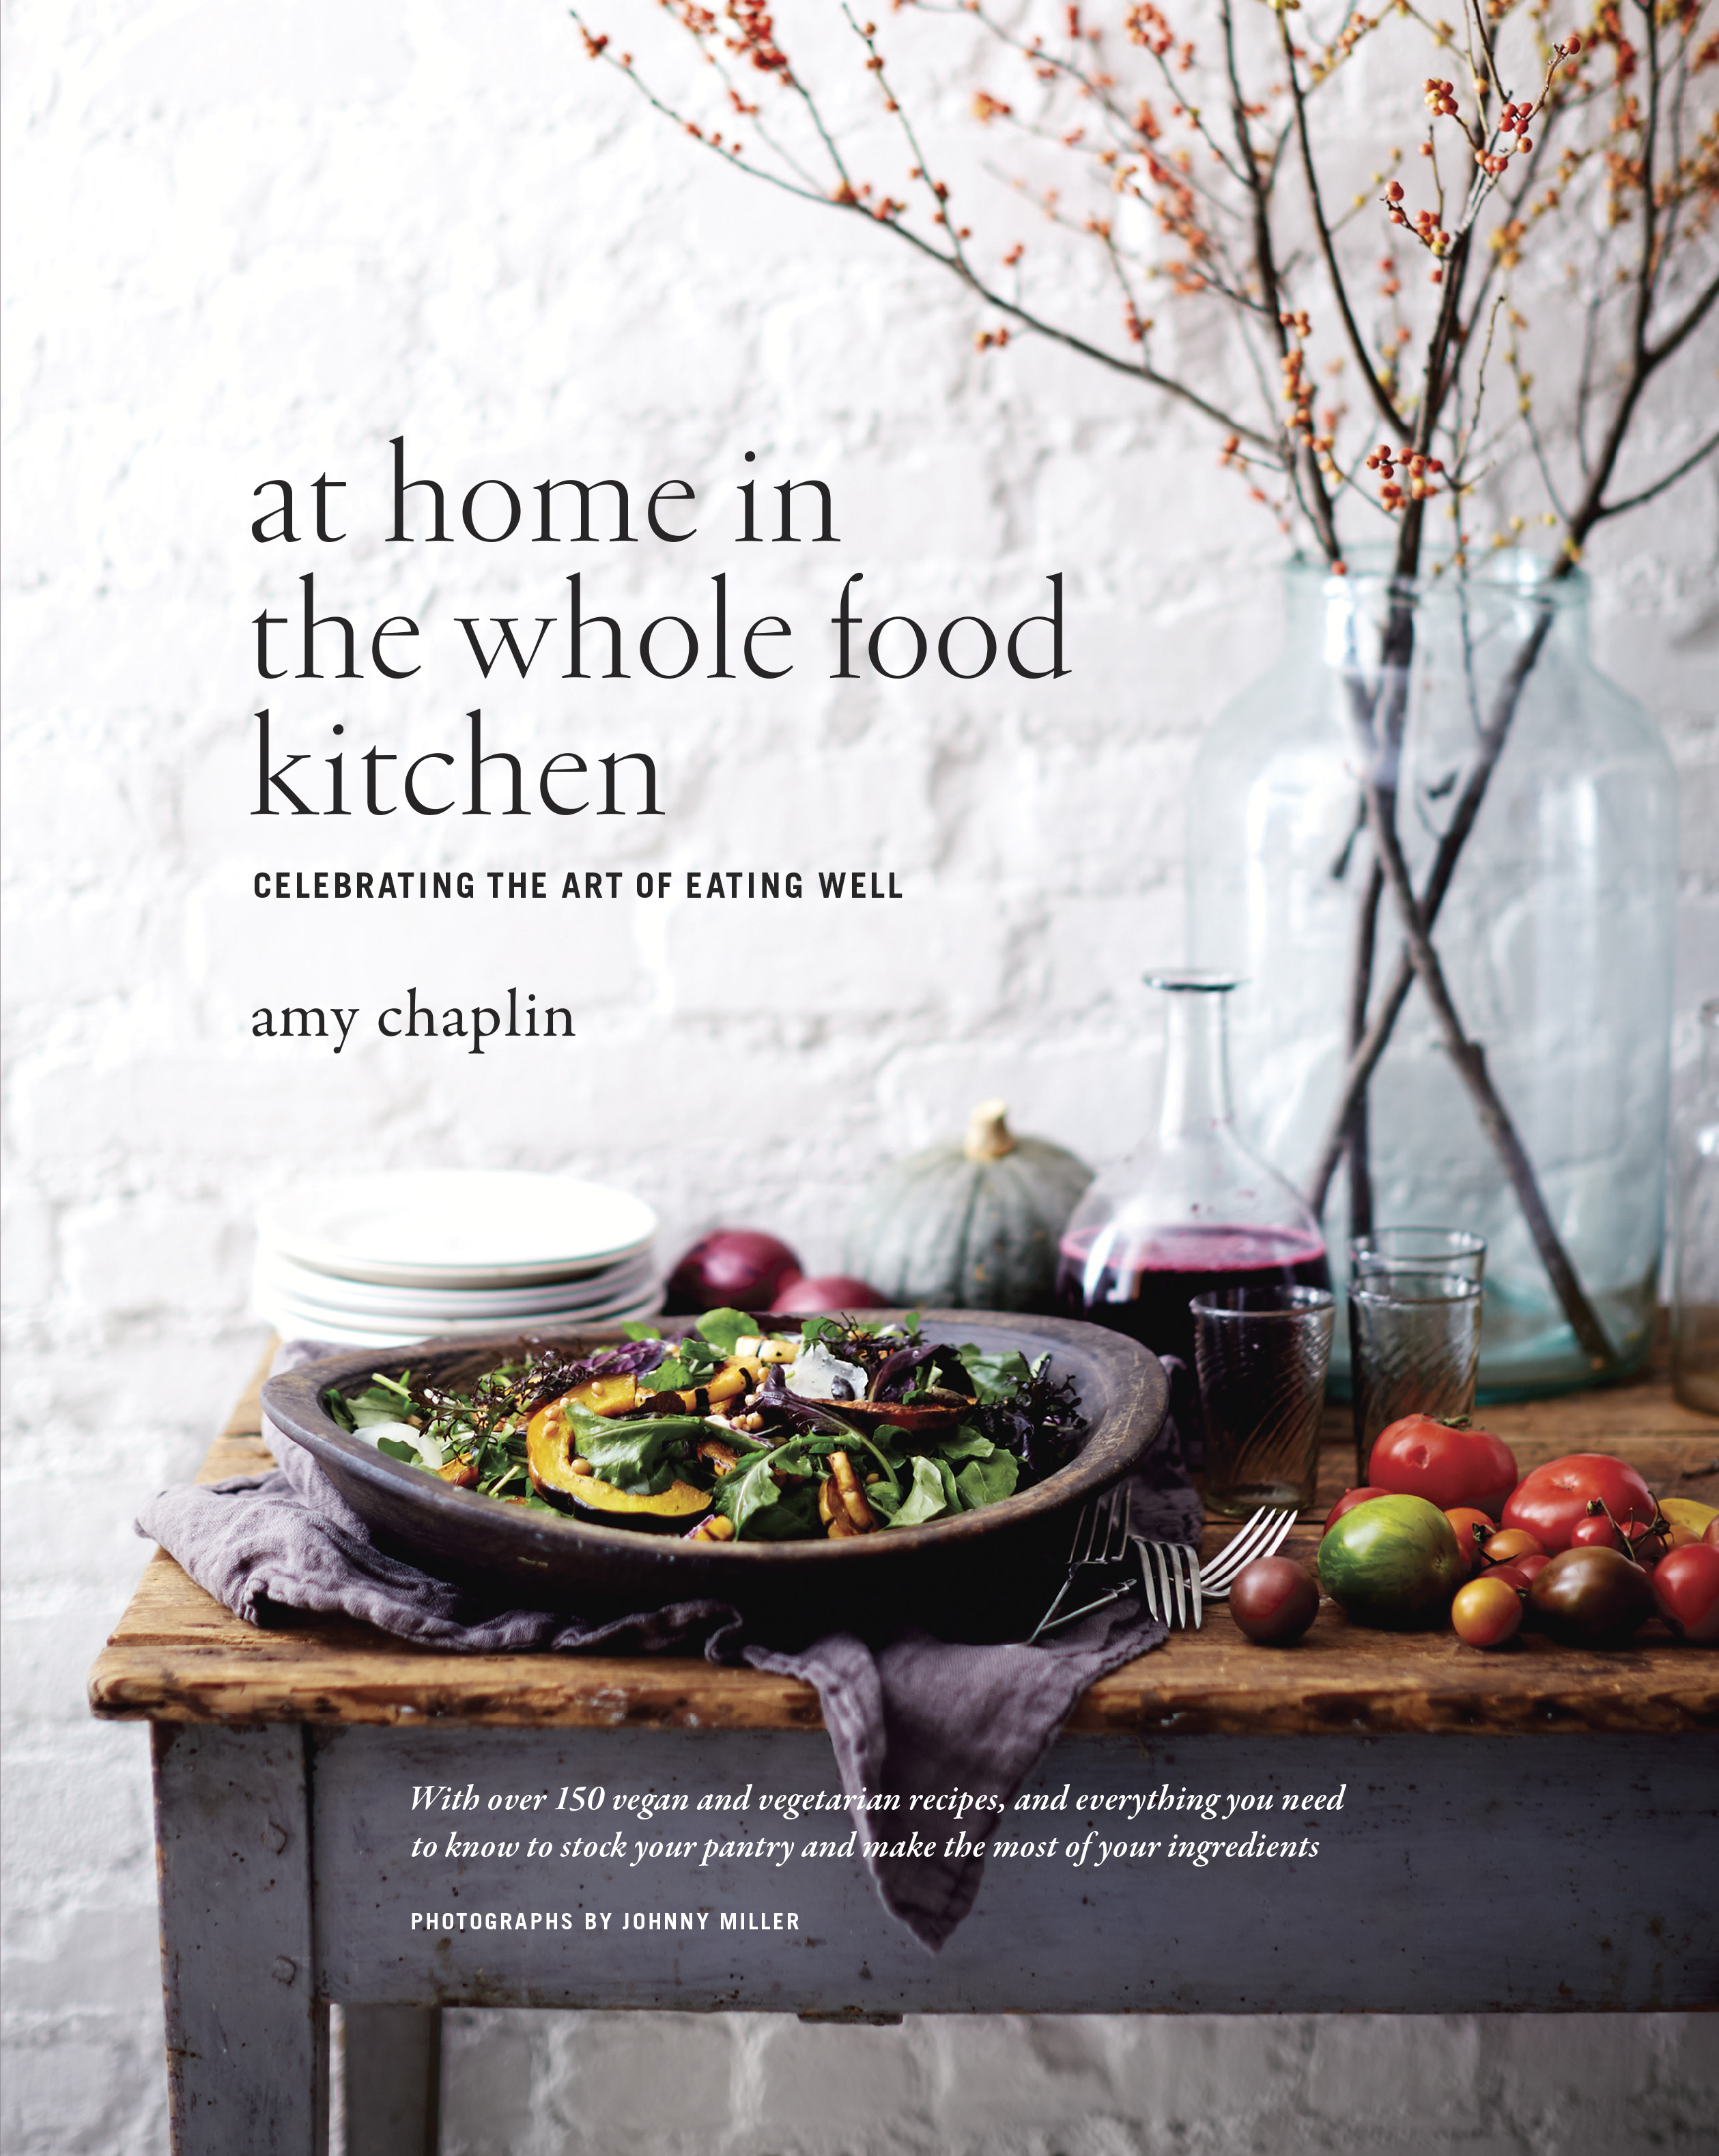 Cookbook Launch: At Home in the Whole Food Kitchen by Amy Chaplin, with Jennifer Aaronson